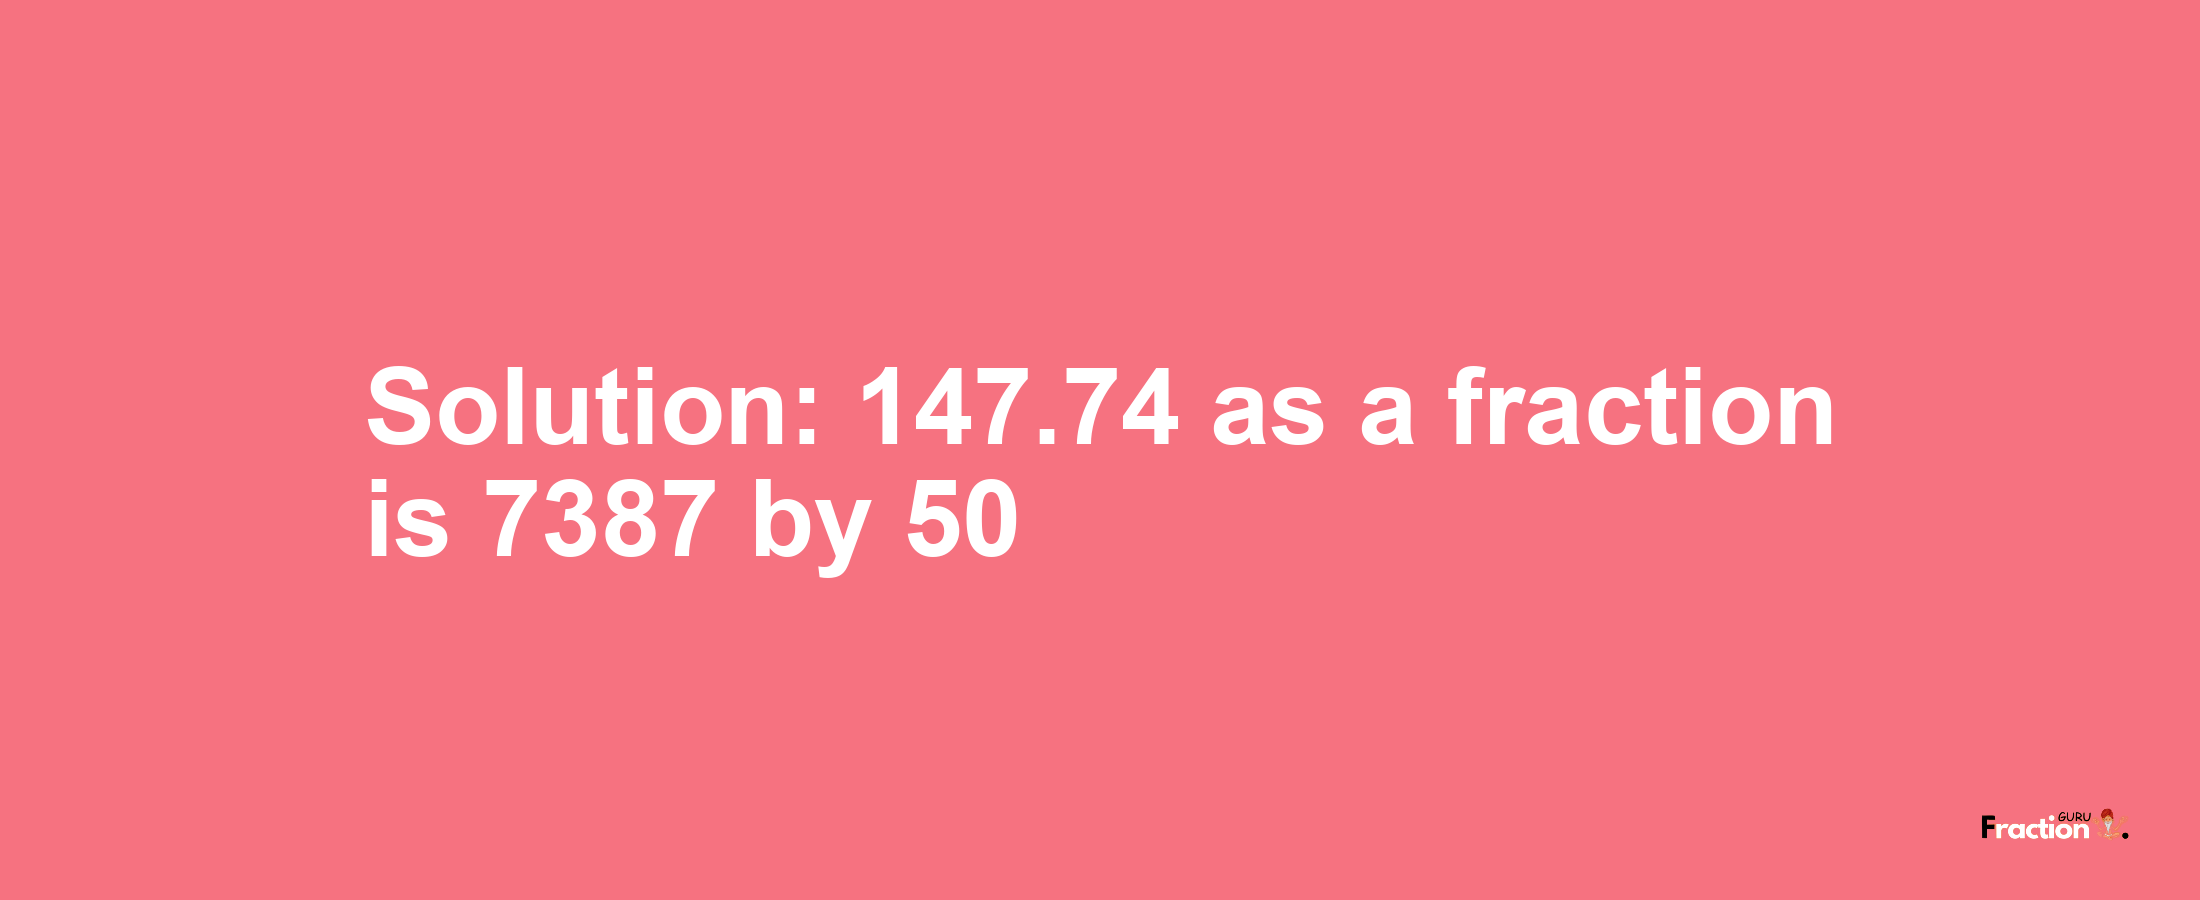 Solution:147.74 as a fraction is 7387/50